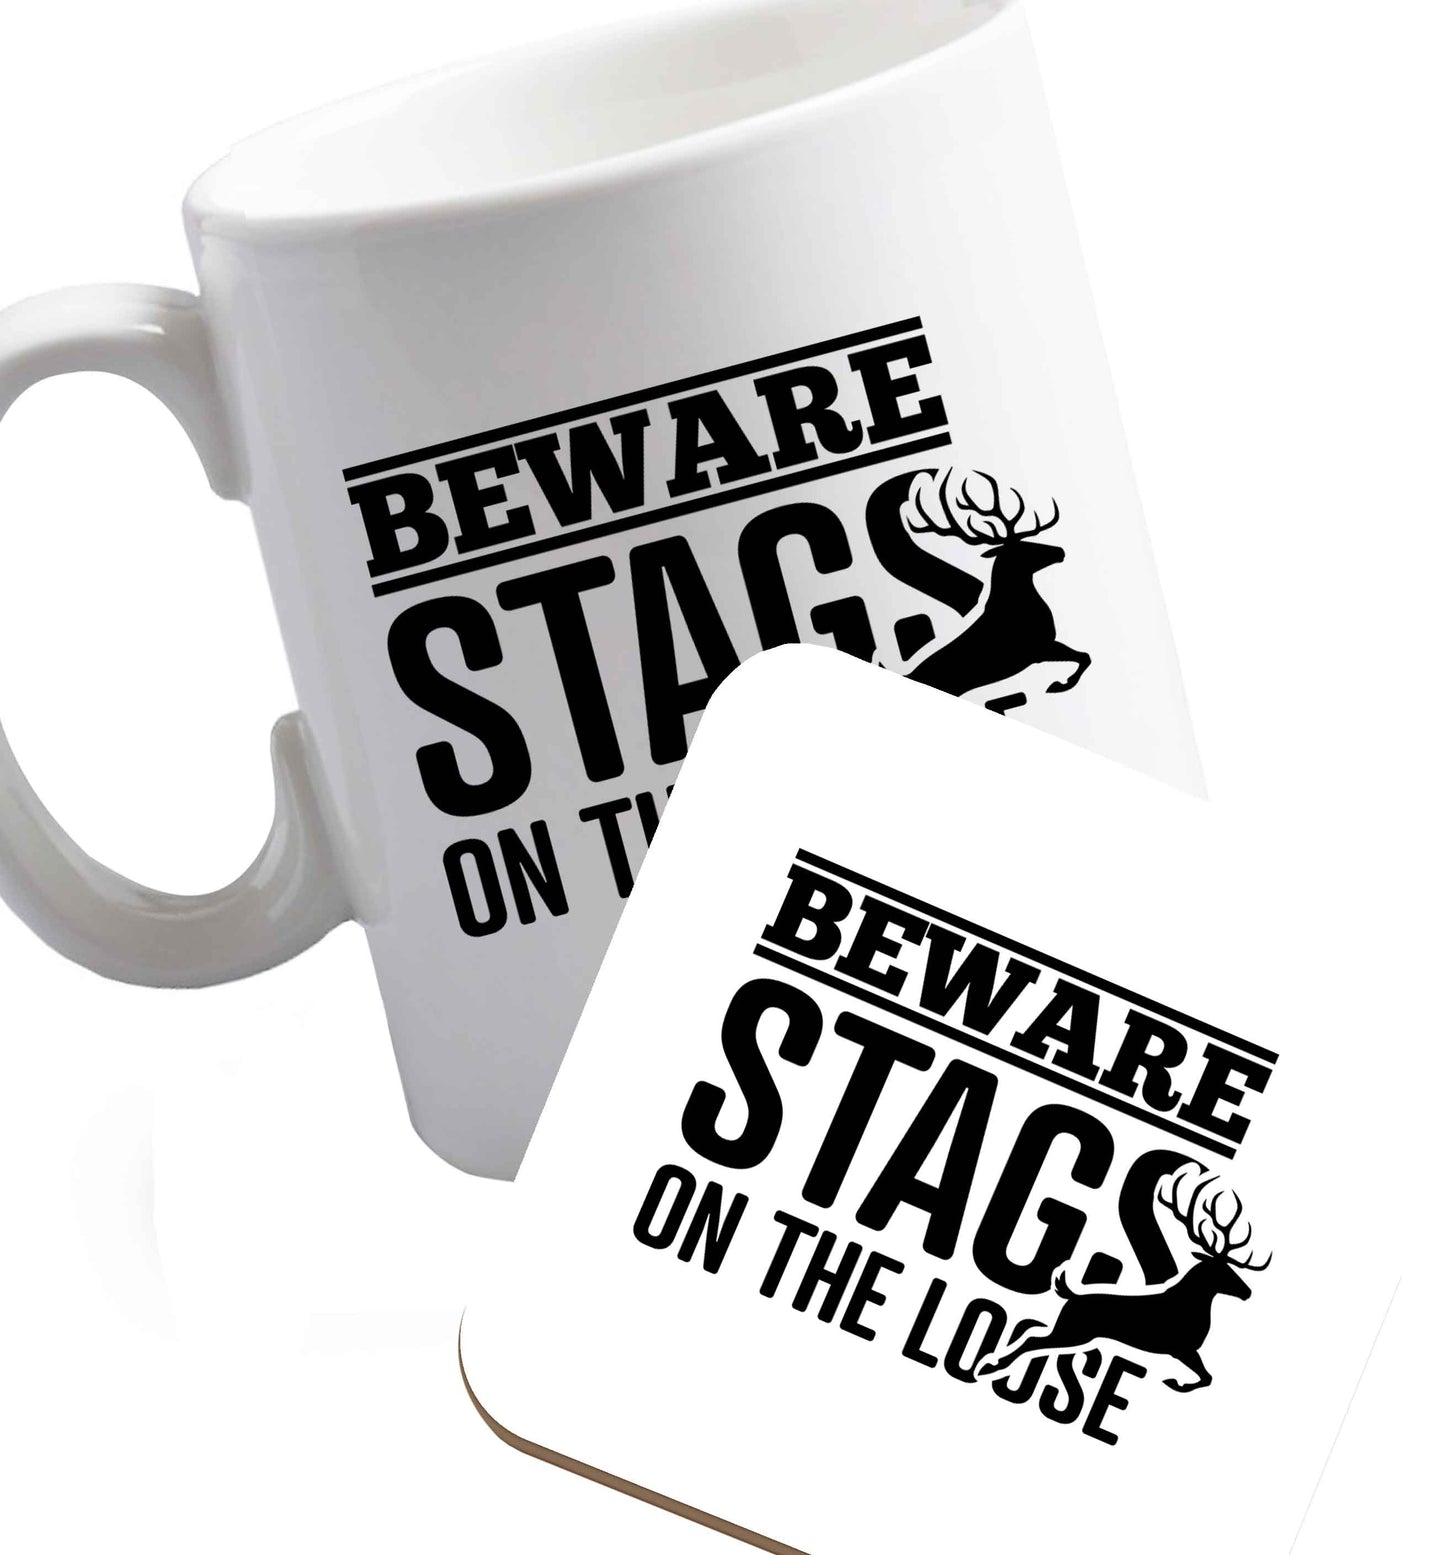 10 oz Beware stags on the loose   ceramic mug and coaster set right handed